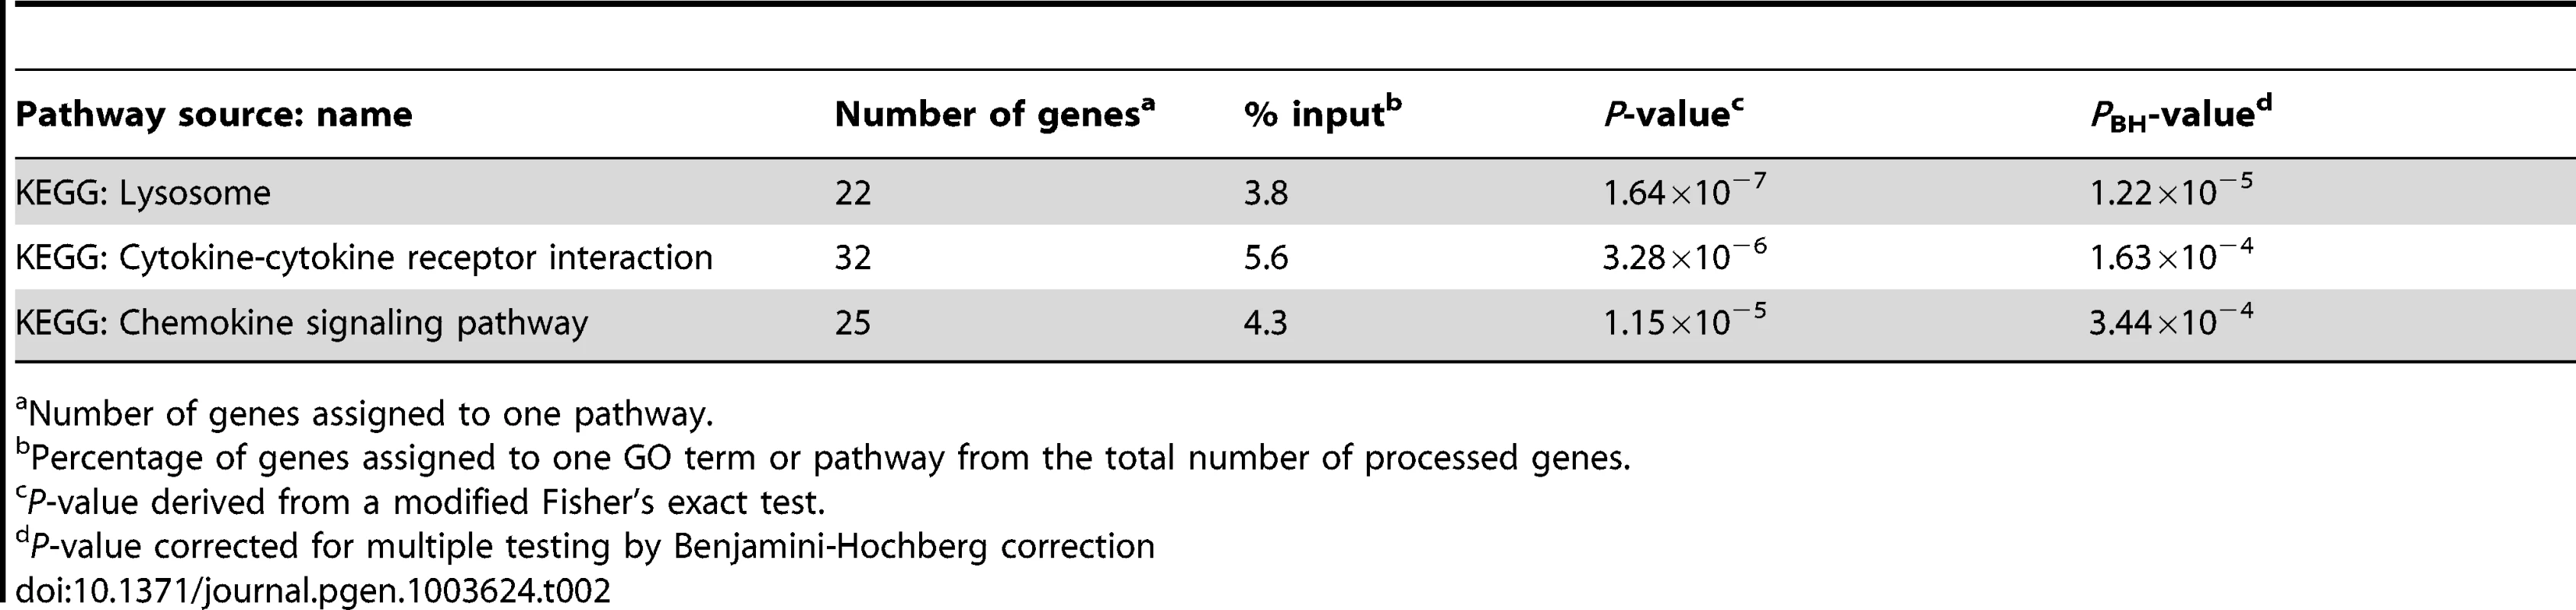 Molecular pathways overrepresented amongst the 572 genes regulated by <i>M. leprae</i> sonicate in the samples from former leprosy patients with and without T1R.